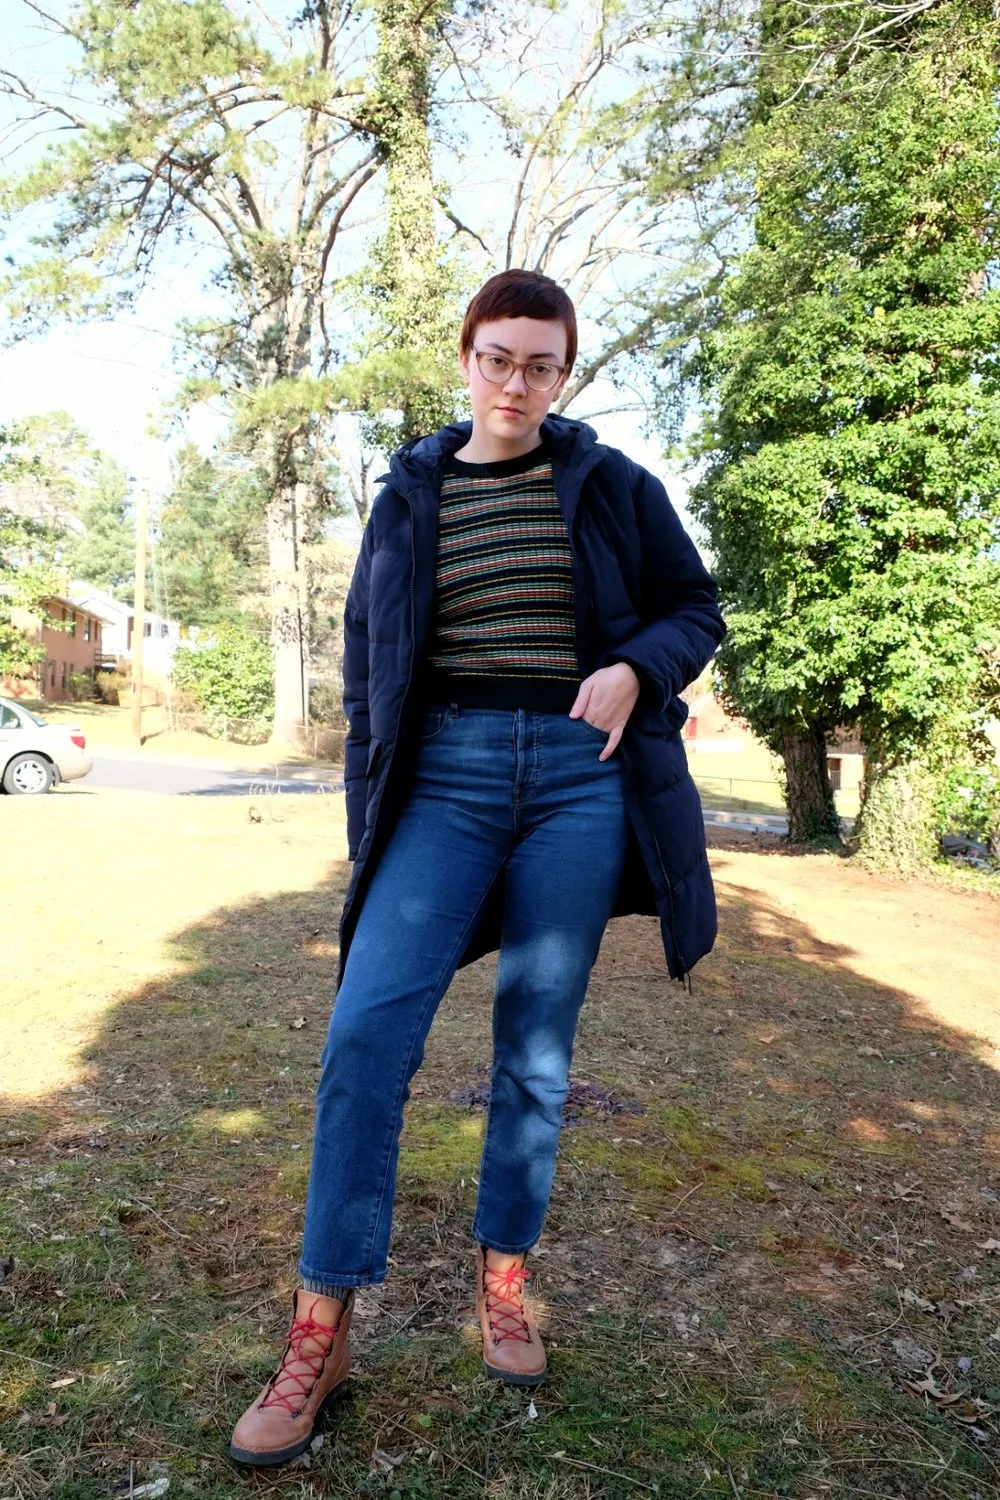 ethical outfit 1980s inspired striped sweater and everlane puffer stylewise-blog.com